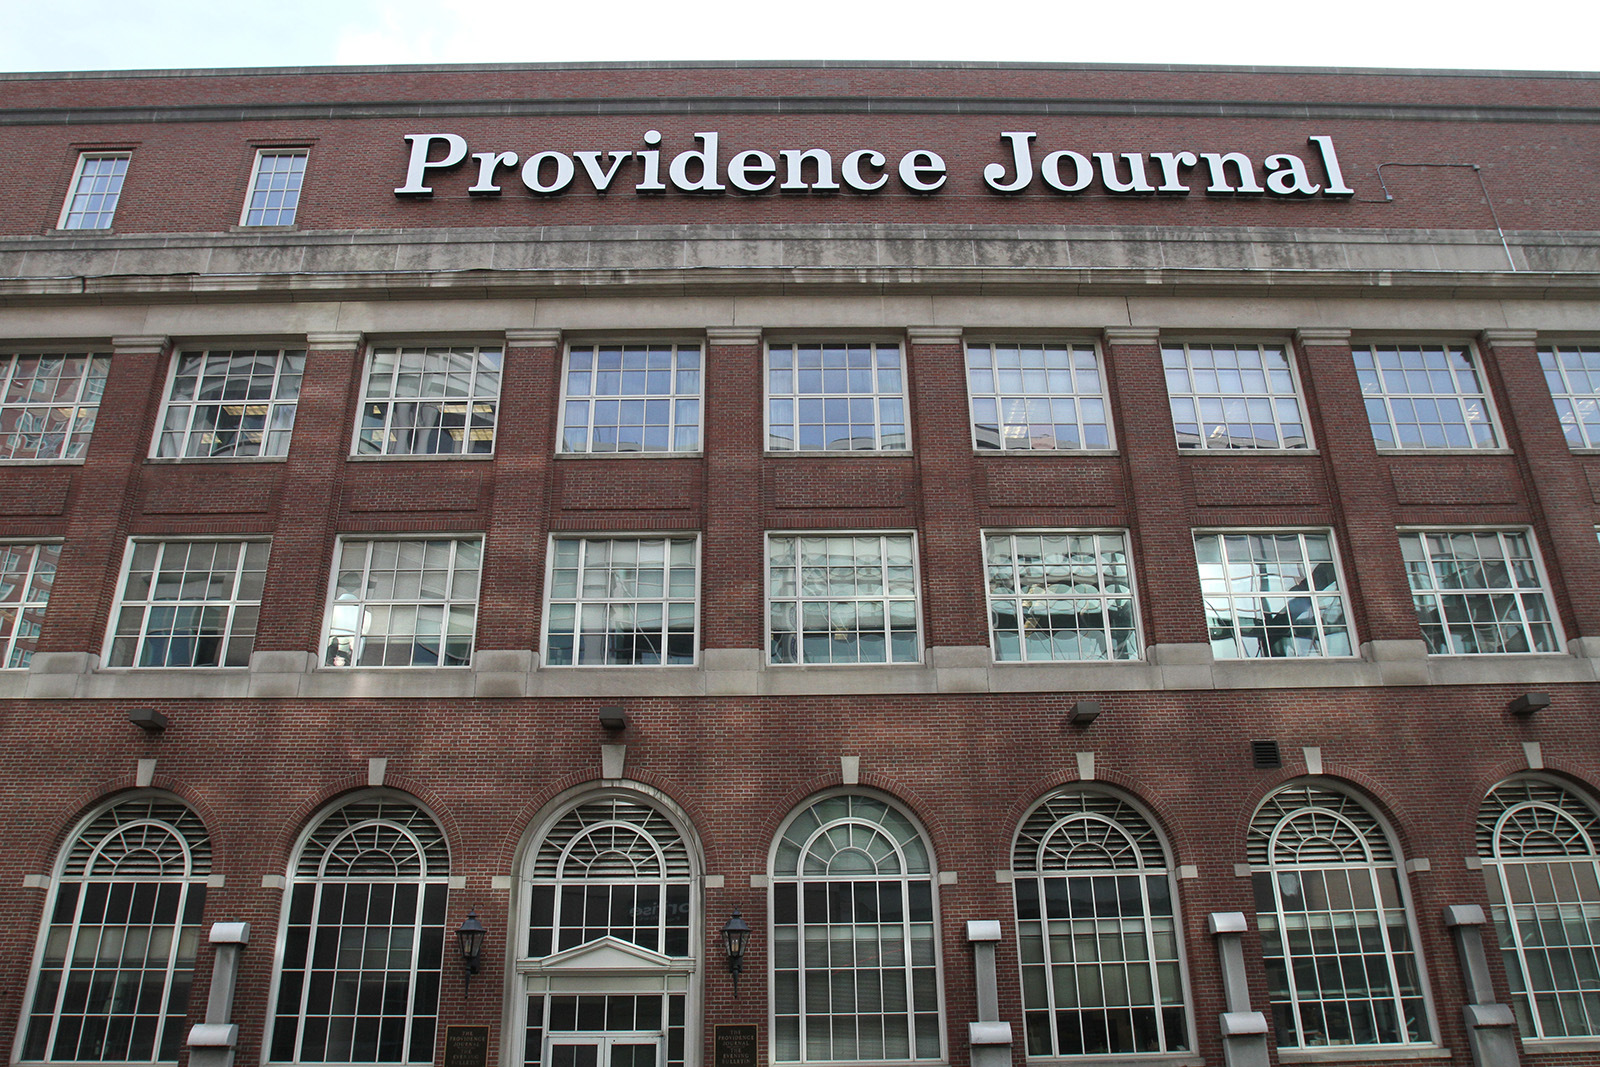 The Providence Journal building